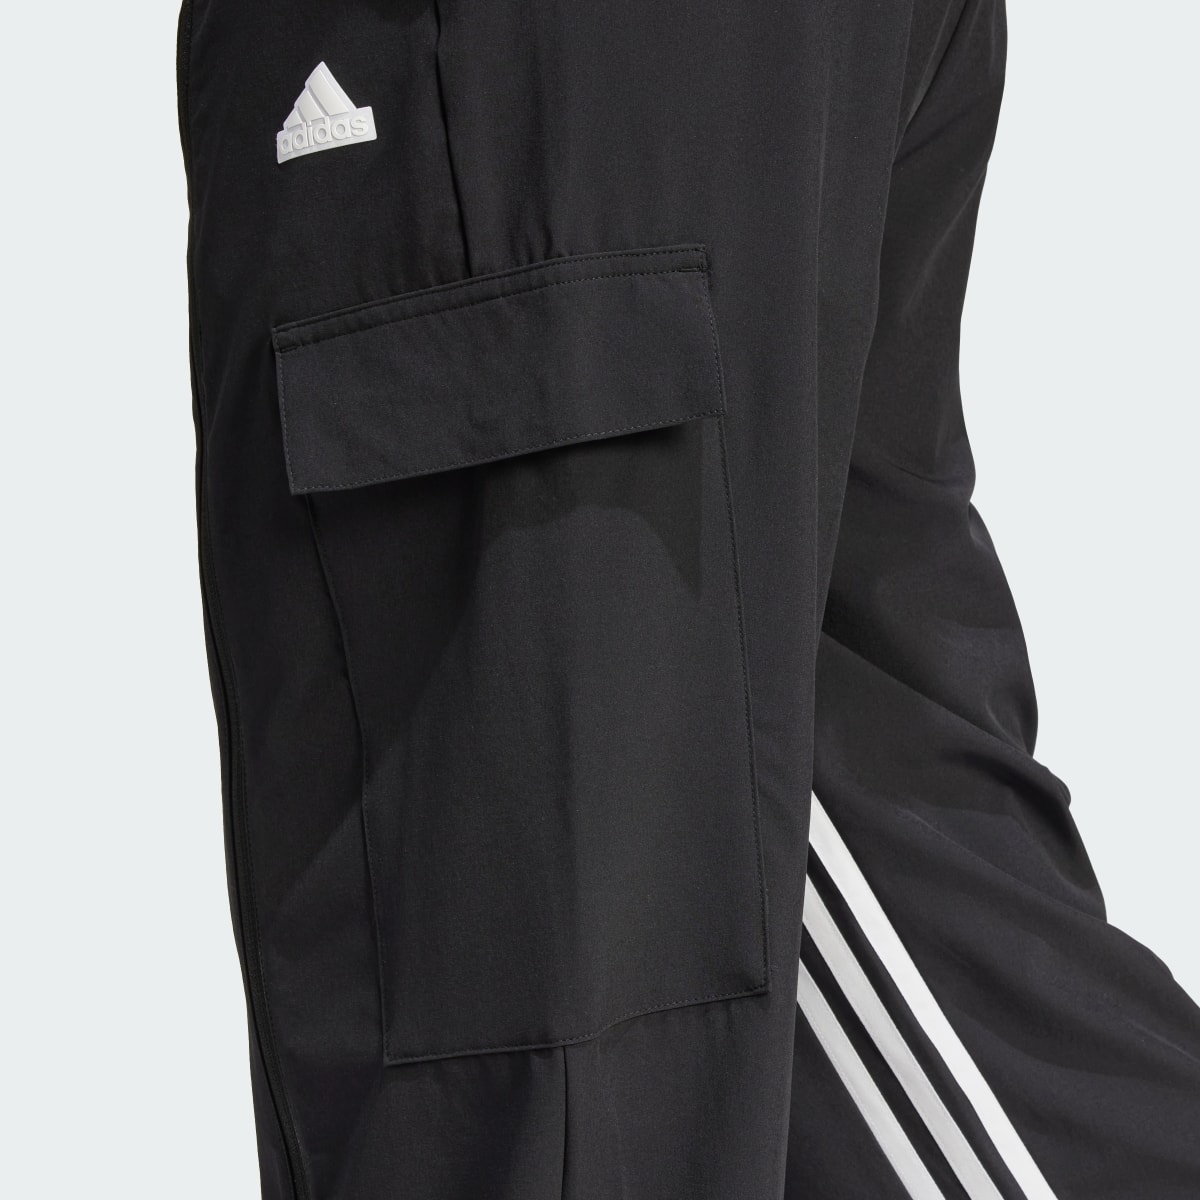 Adidas Express All-Gender Cargo Tracksuit Bottoms. 5